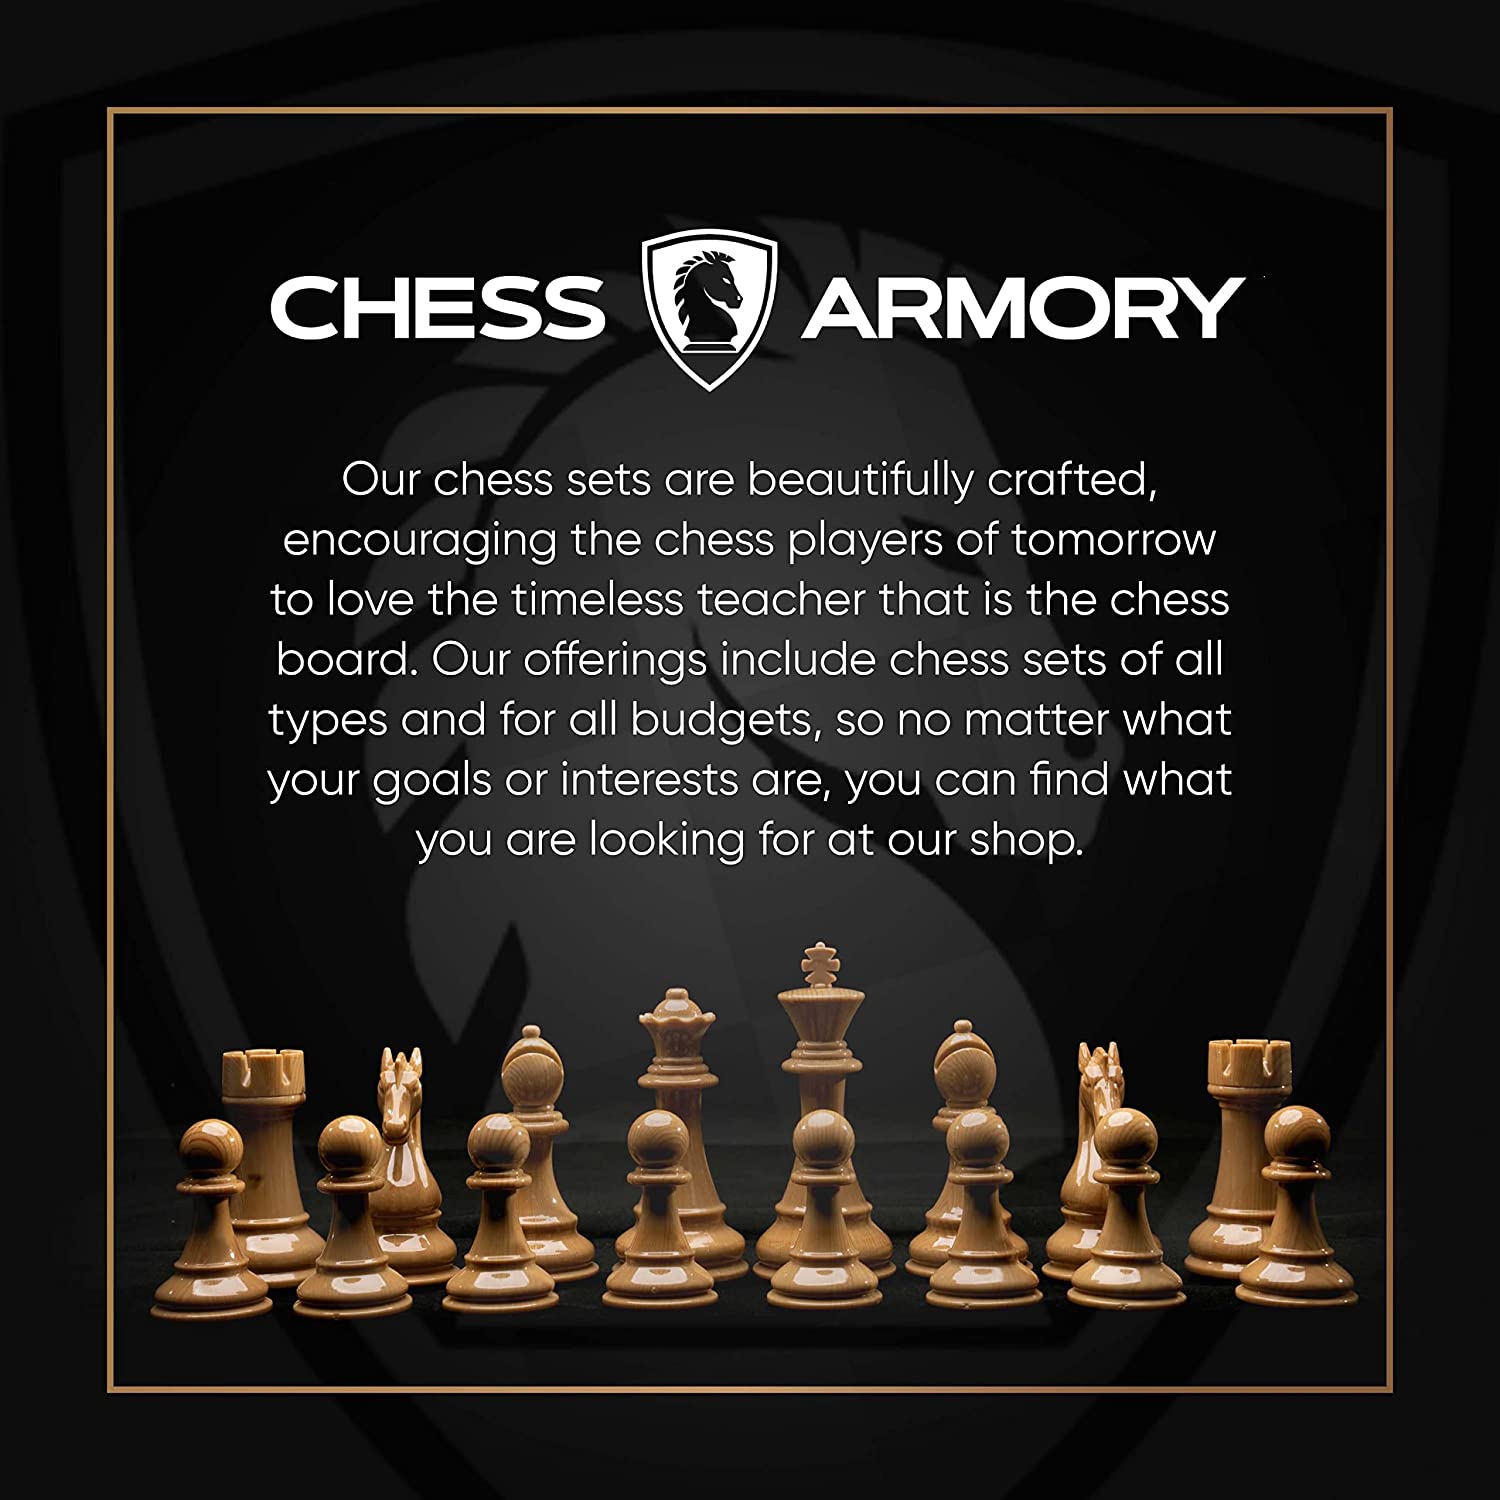  AMEROUS High Polymer Weighted Chess Pieces with 4.25'' King - 2  Extra Queens - Gift Package, Standard Tournament Chessmen for Chess Board  or Replacement of Missing Pieces (Chess Pieces Only) 